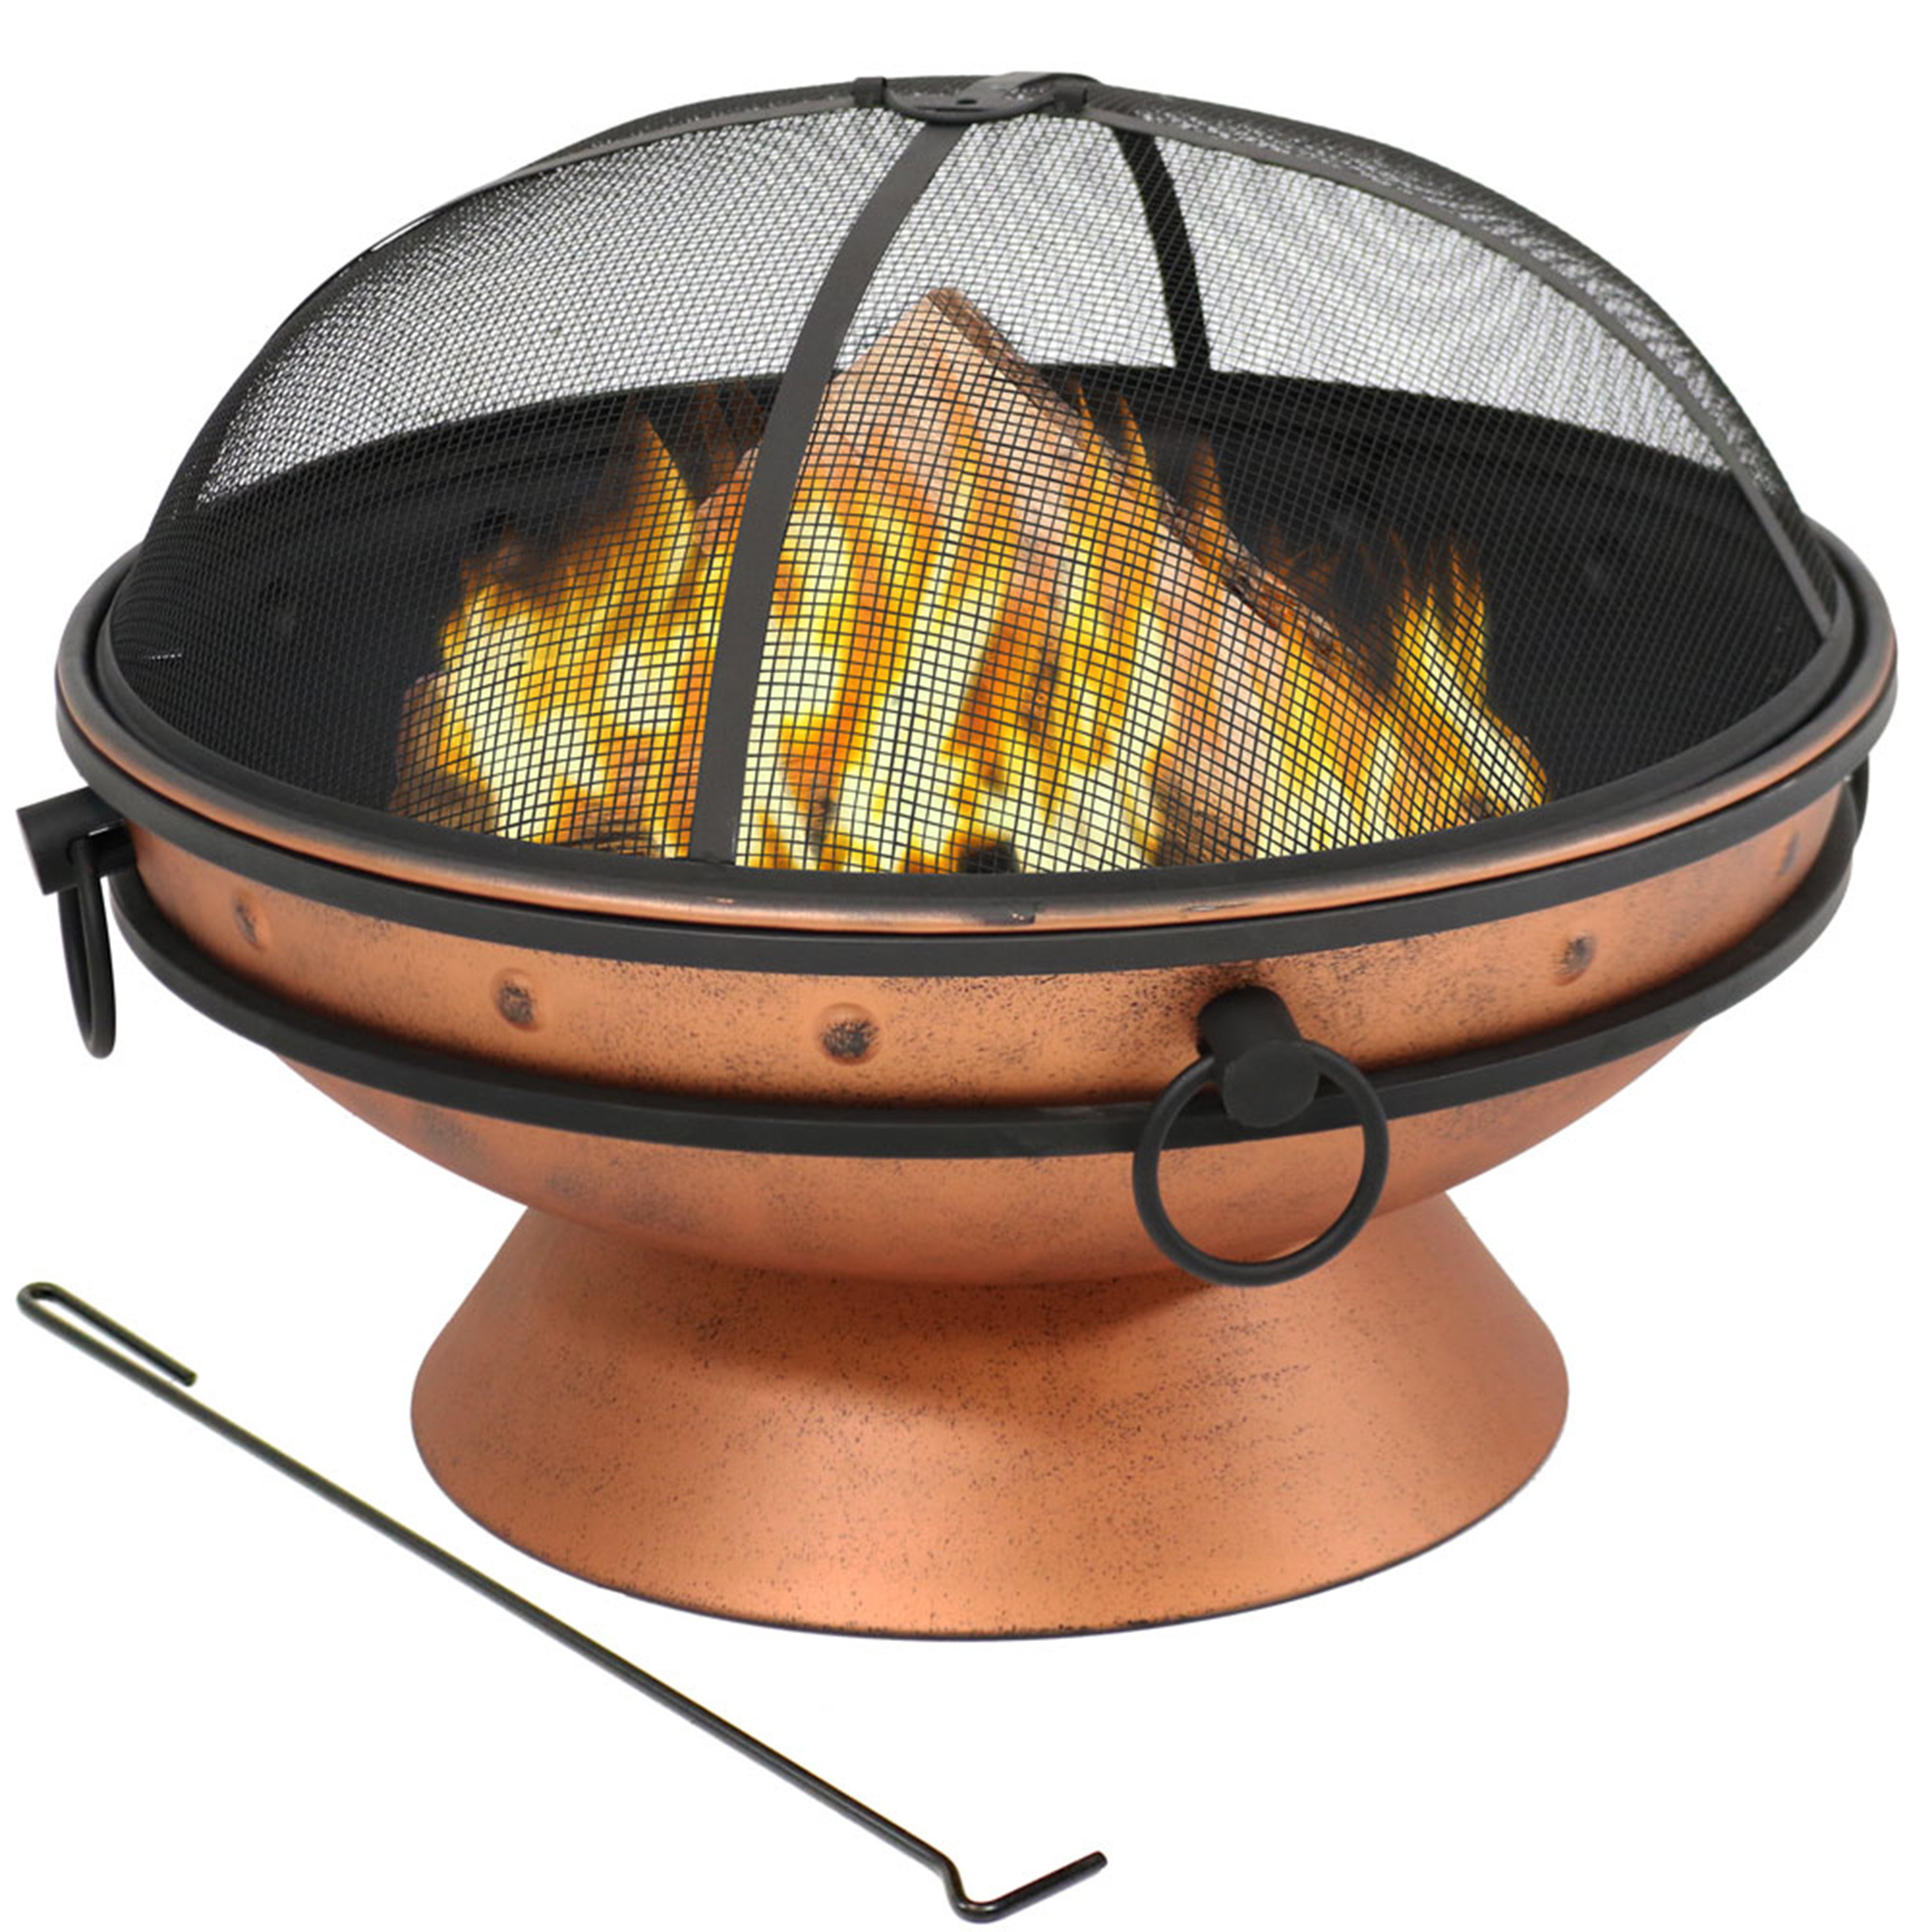 Sunnydaze Royal Cauldron Copper Fire Pit with Handles and Spark Screen - 30-Inch